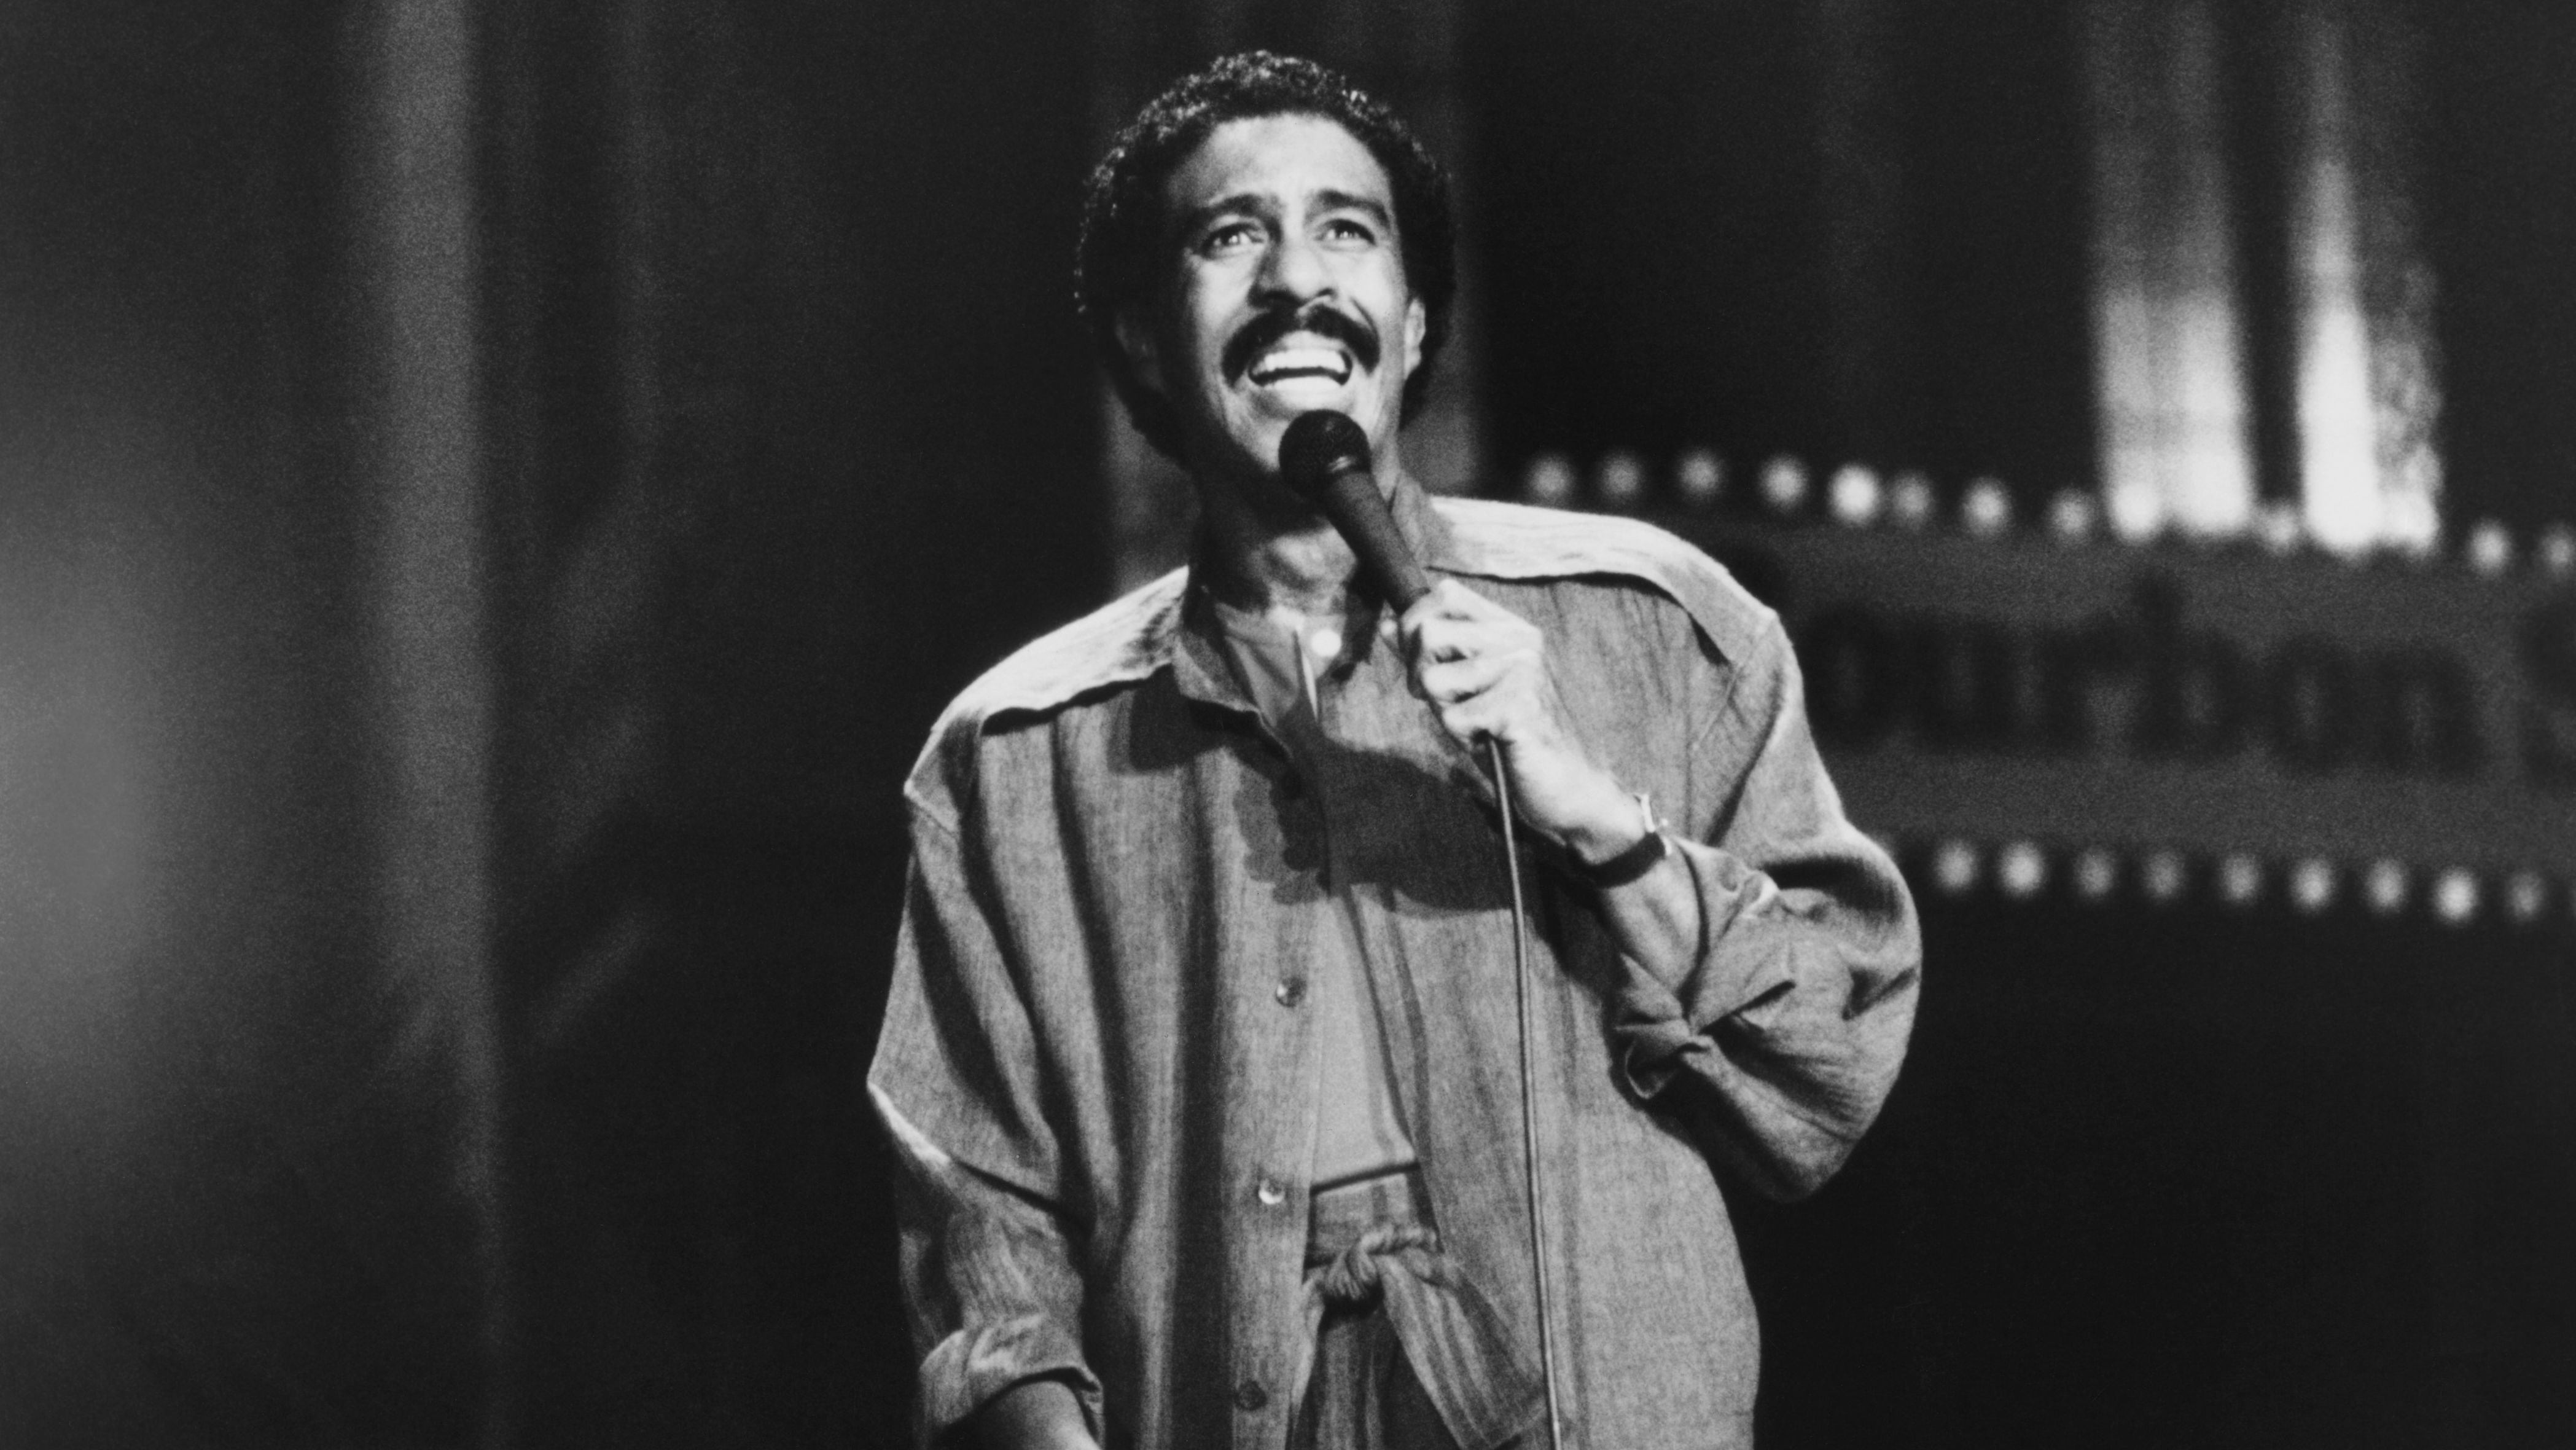 Richard Pryor was open about his bisexuality to friends. At one notorious public performance, he opened up to an audience about his attraction to men.